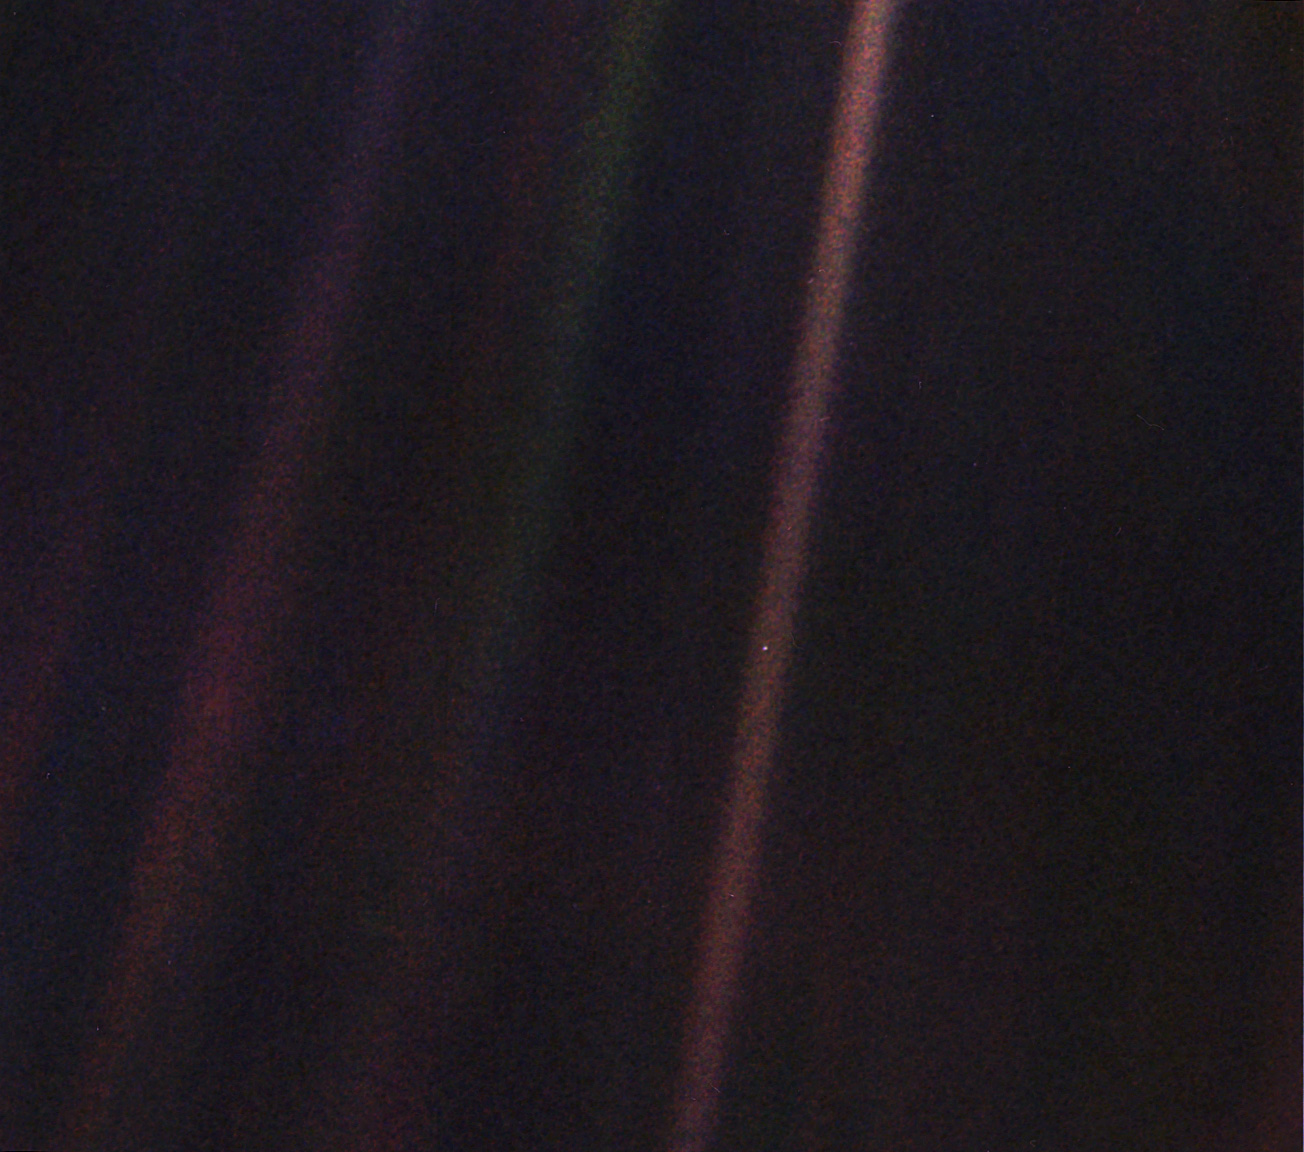 Earth as a speck of light in sunbeam from millions of miles away.